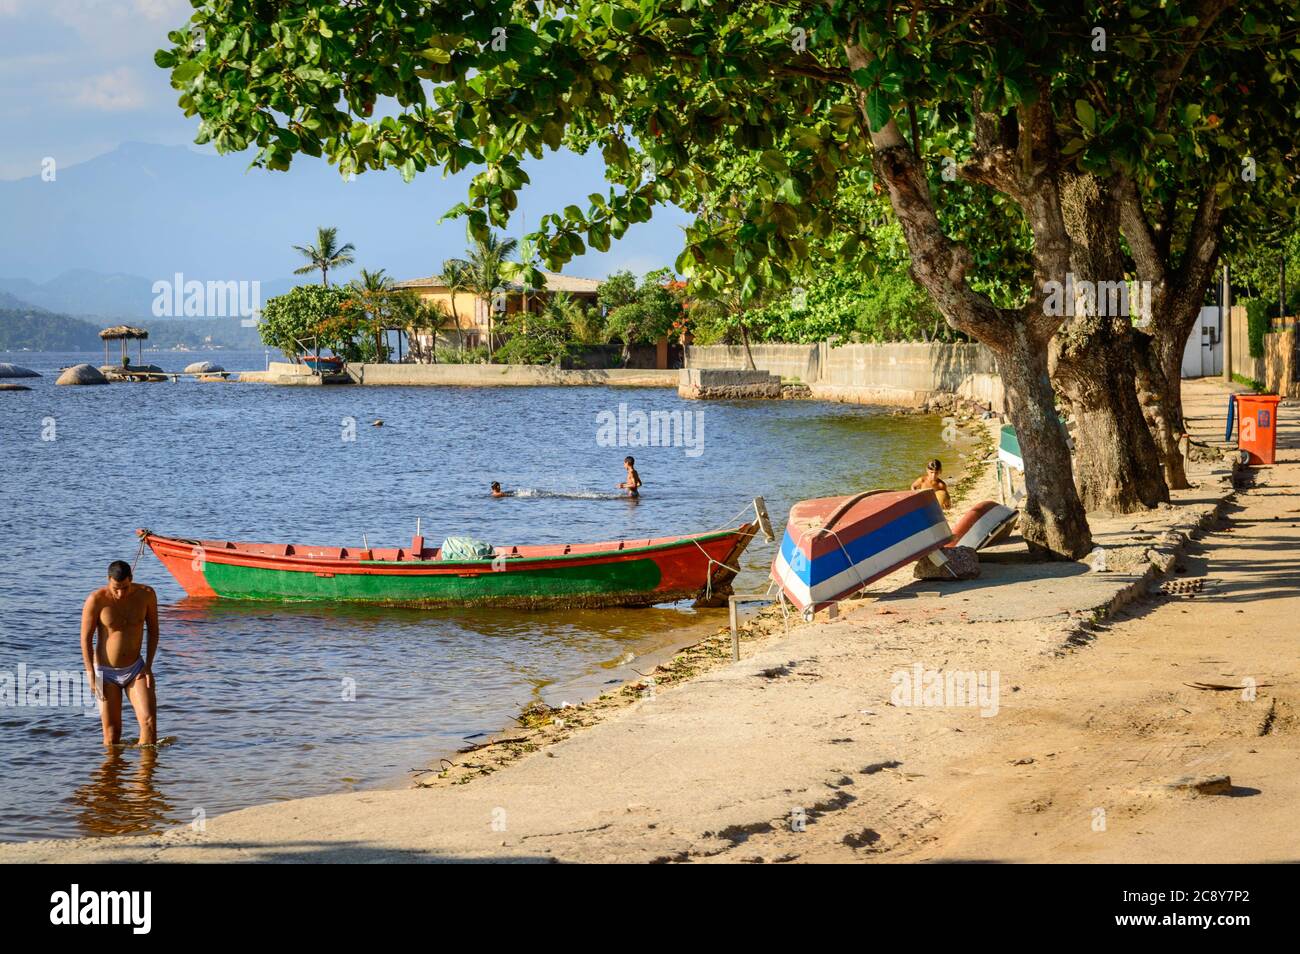 Locals bathing in the tranquil waters at Paquetá Island against lush trees, colorful fishing boats, and sunny sky. Stock Photo